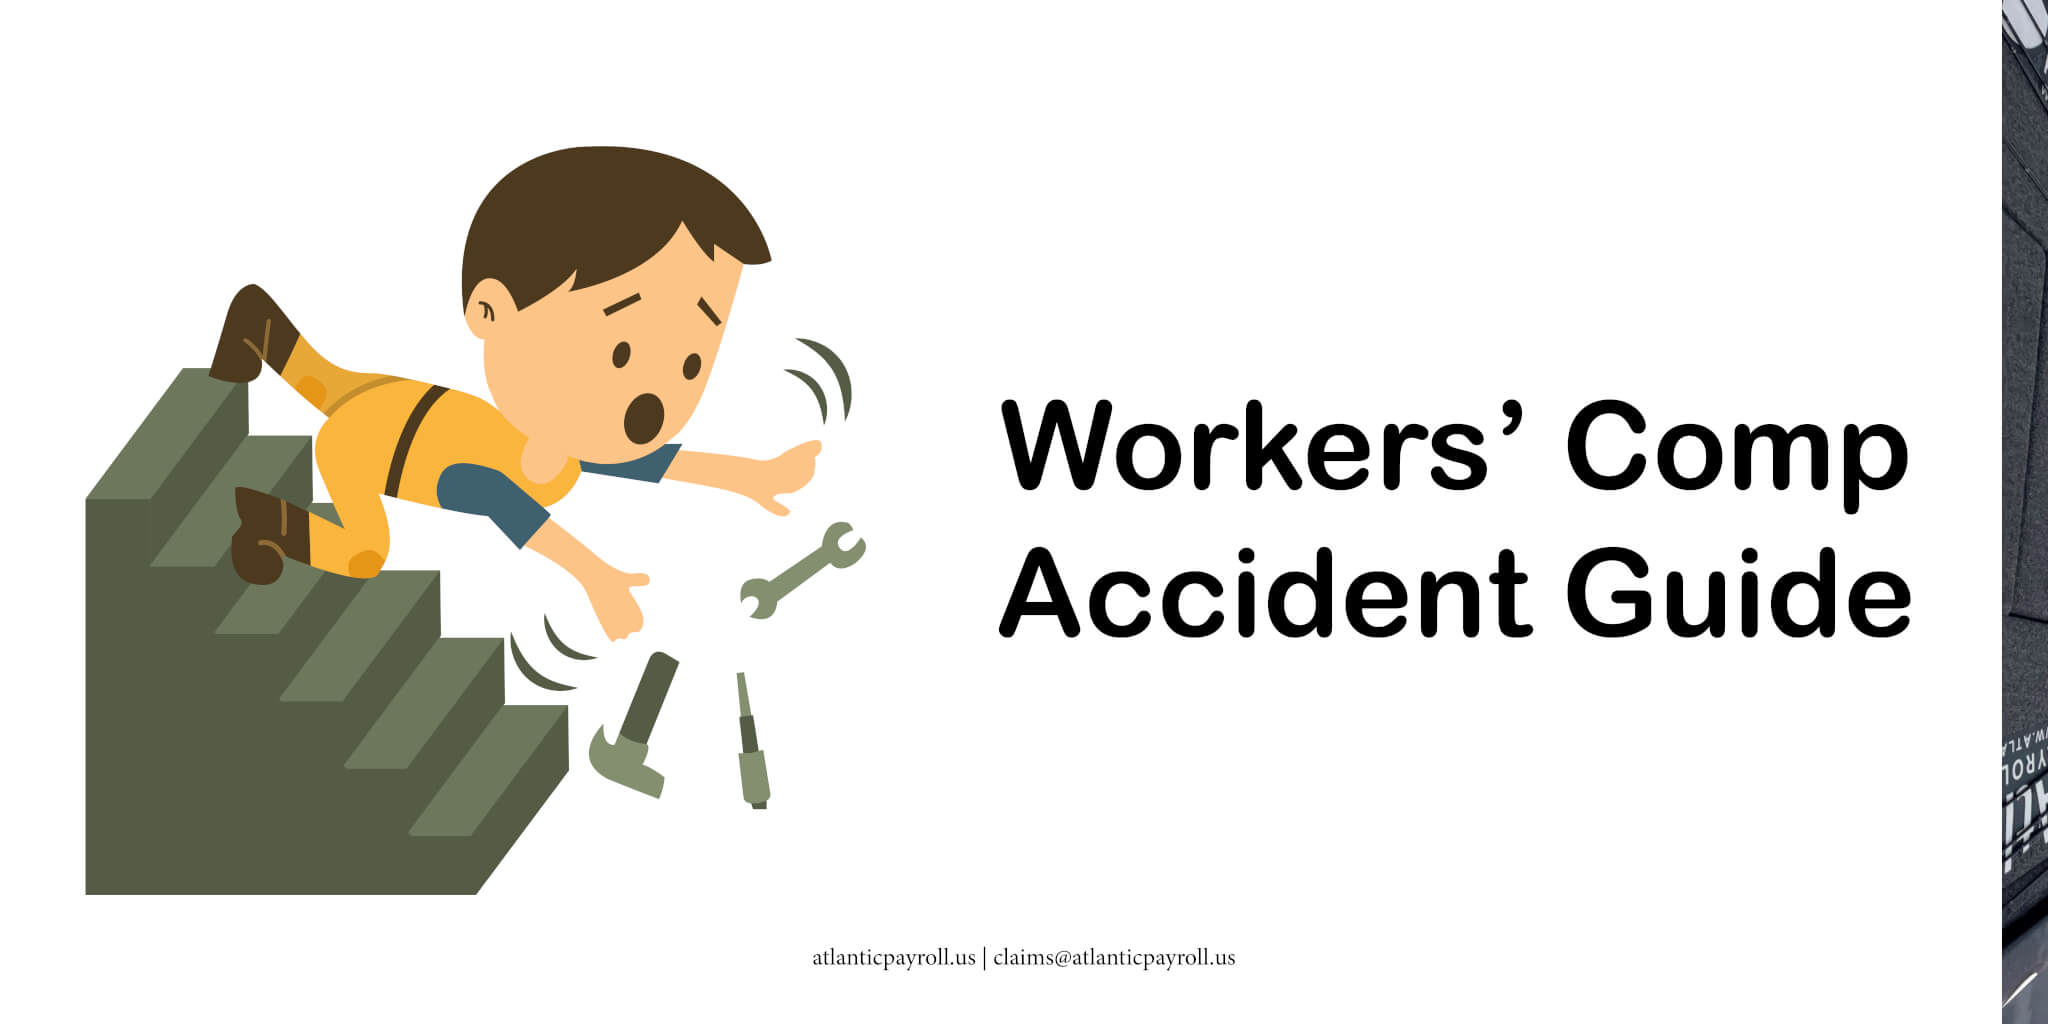 Workers’ Comp Accident Guide